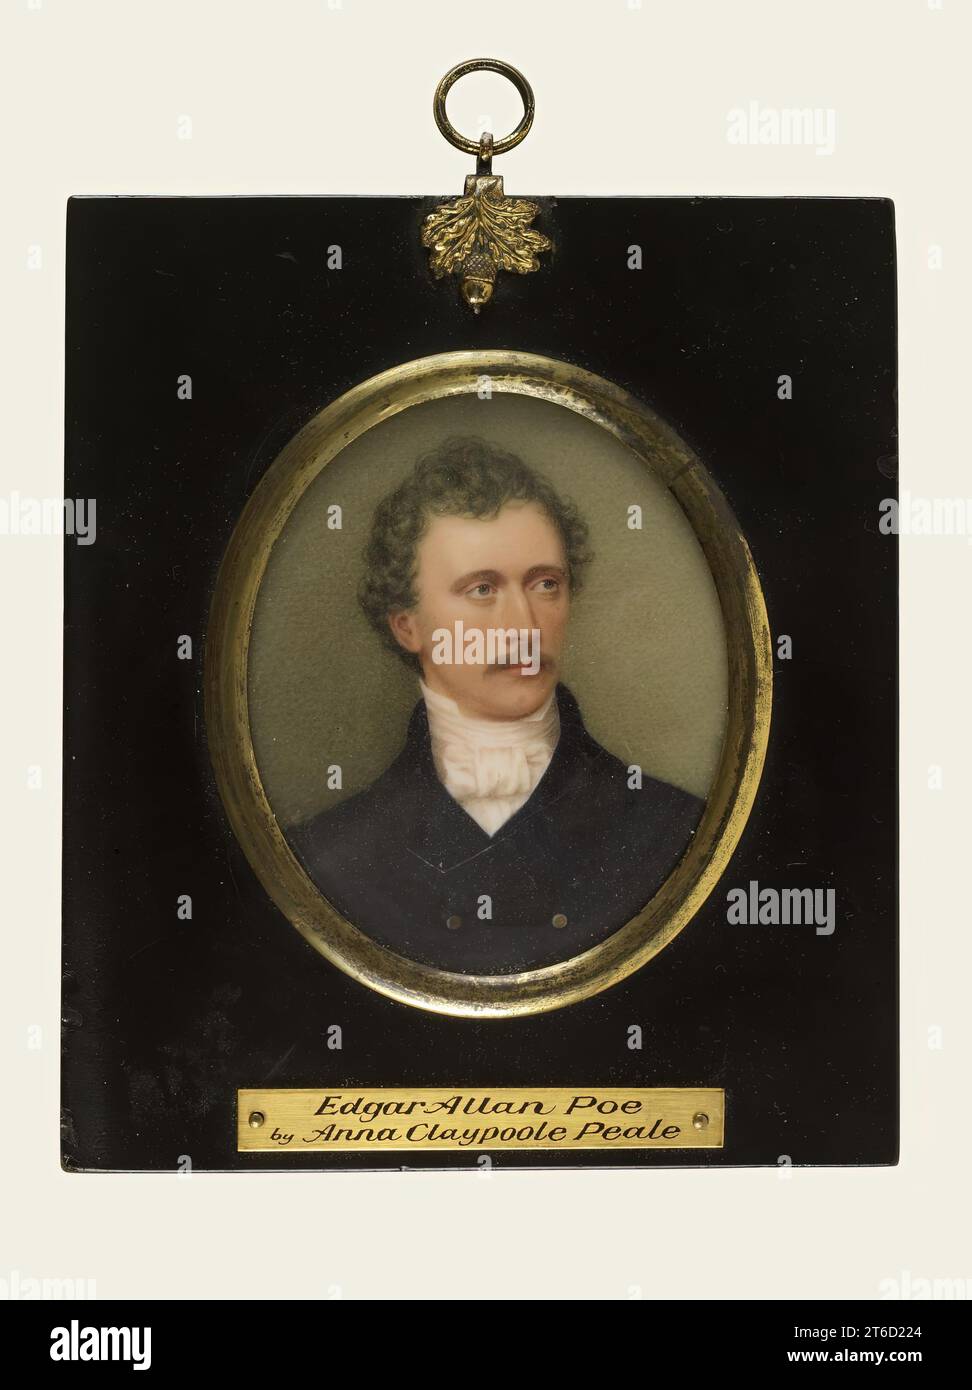 Mr. John T.(?) Pilling, 1834. Bust-length portrait of Mr. John T.(? or W.?) Pilling, with dark curly hair and moustache, wearing a dark blue coat with black velvet collar, gold buttons on coat, white shirt and high white collar and white stock tied in a bow. The frame claims that the portrait is of Edgar Allan Poe, but this was proved to be spurious when an inscription was found on the back of the portrait reading &quot;Mr. John T. [or perhaps W.?] Pilling, Frankford, May 24th 1834.&quot; The attribution to Anna Claypoole Peale is also questionable. Stock Photo